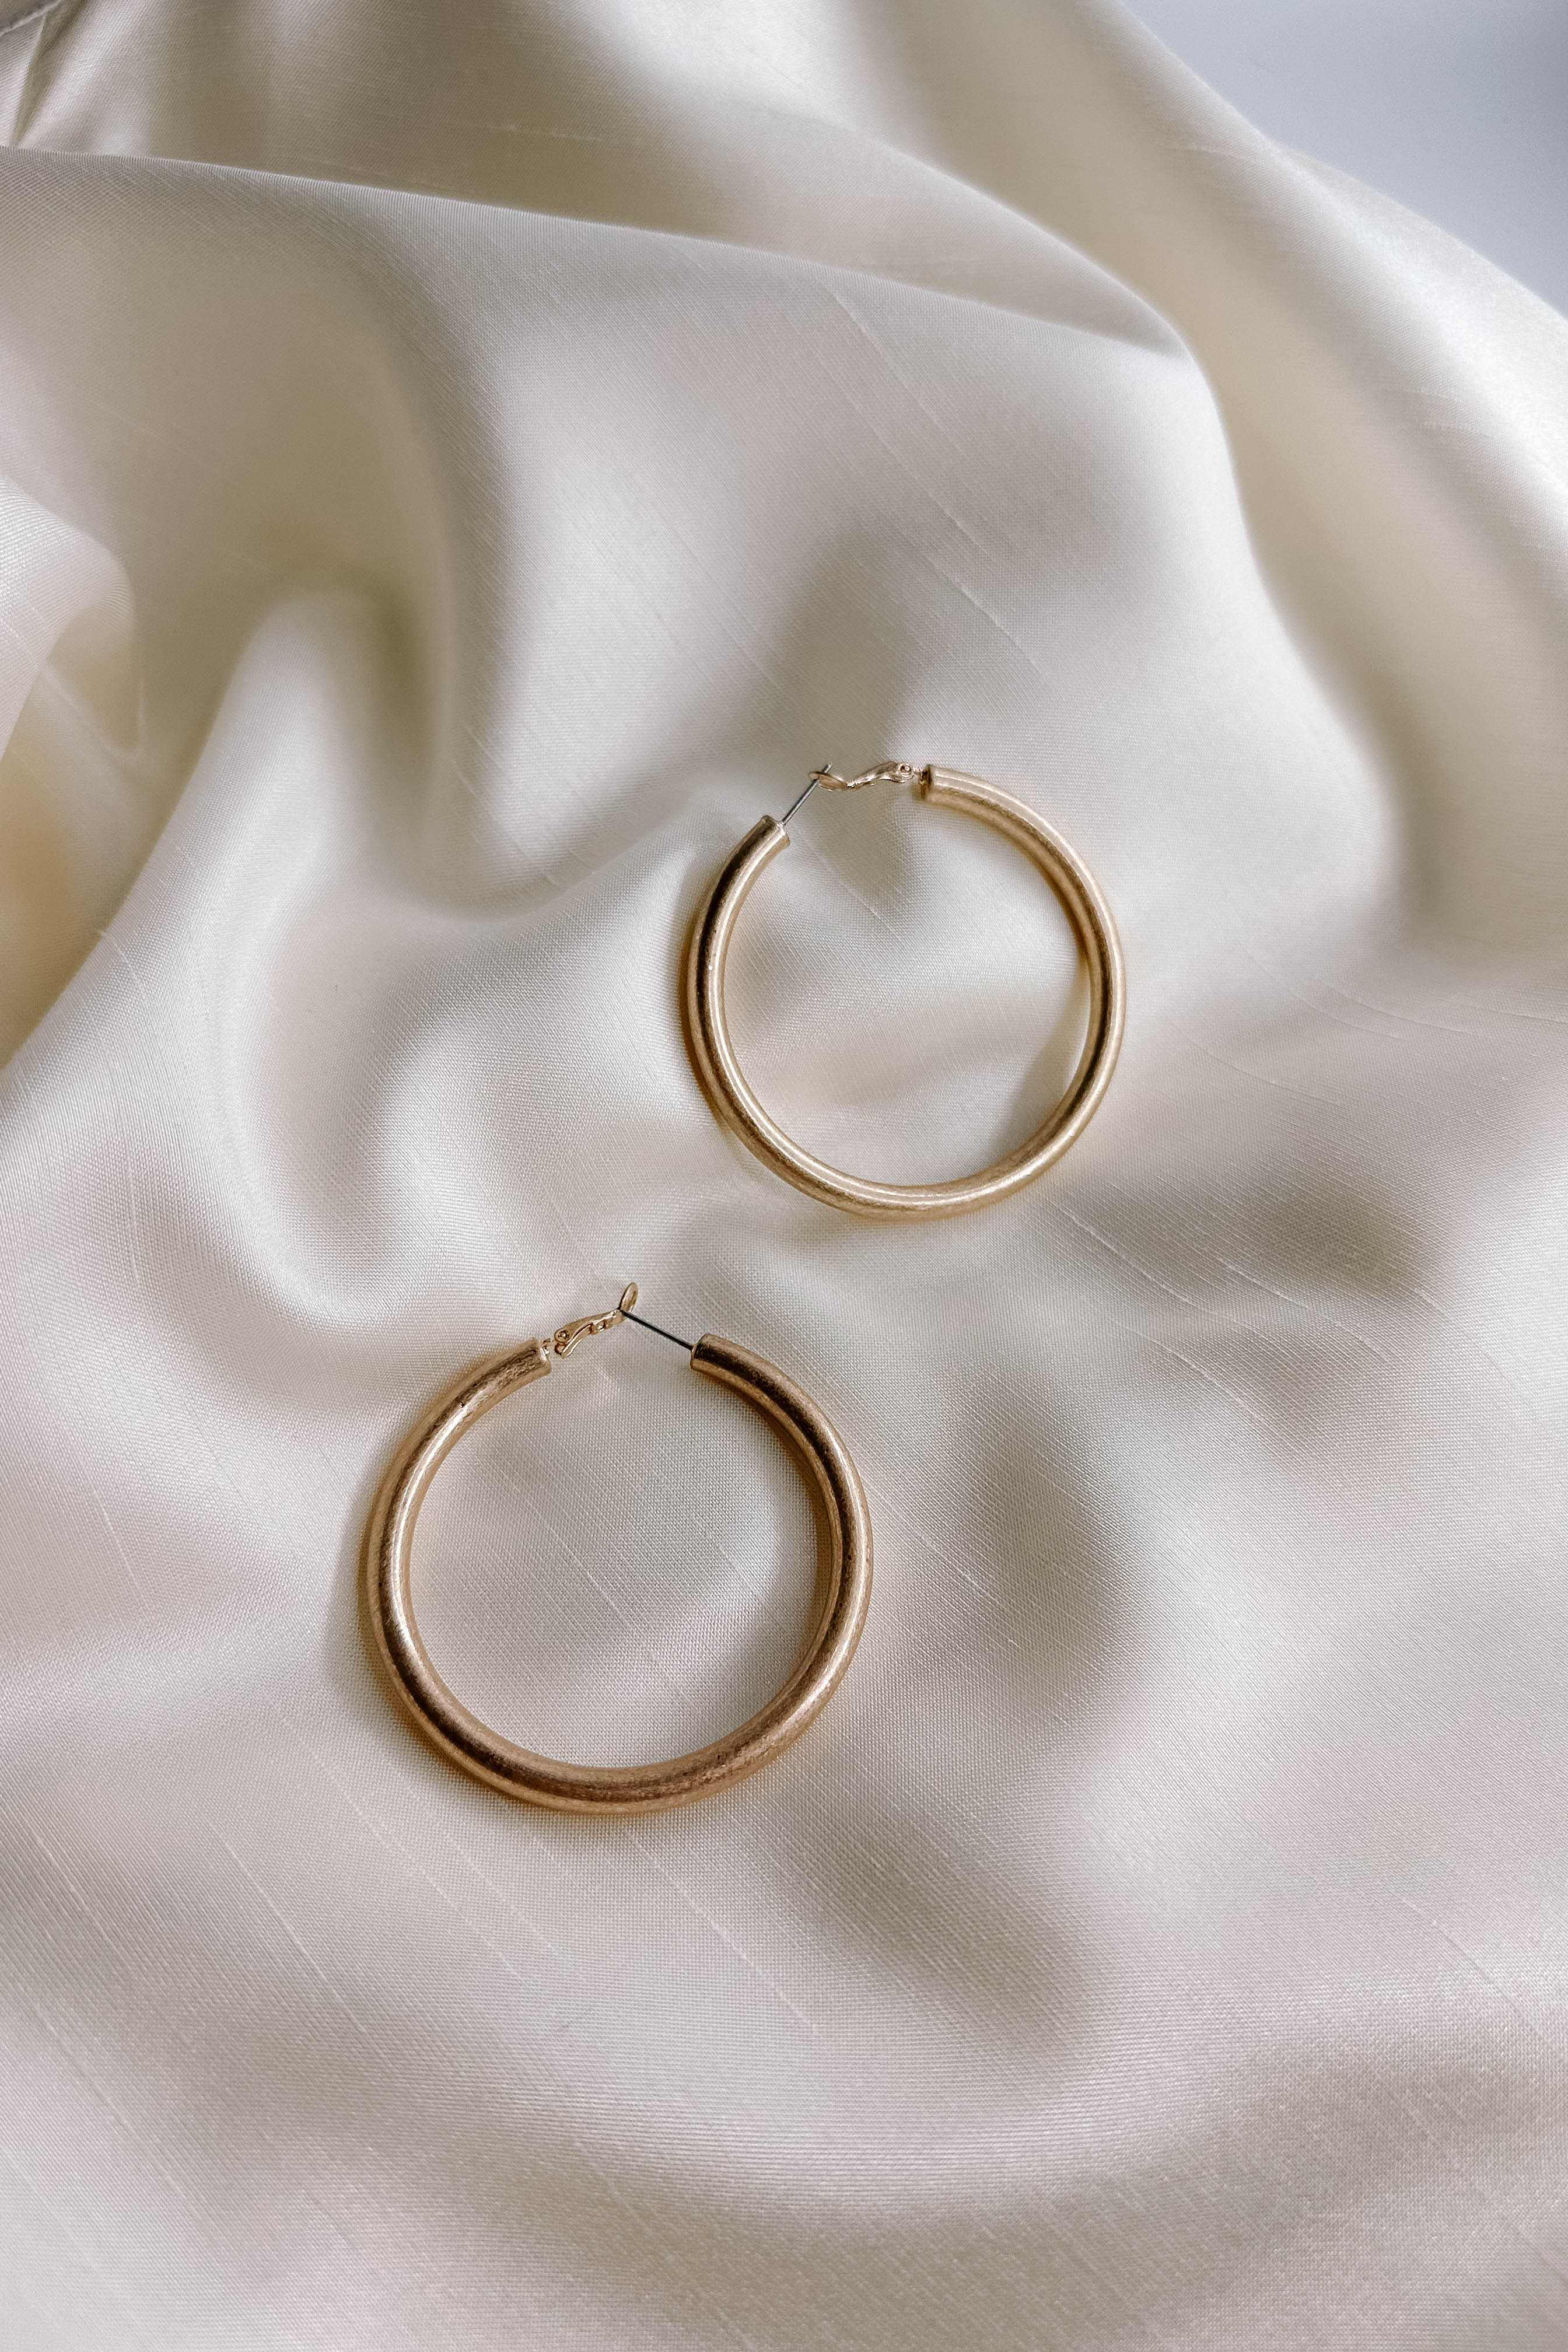 Close up top view of the Lucy Gold Brushed Hoop Earrings that features closed, medium brushed gold hoops with a hinged closure, shown on cream fabric.